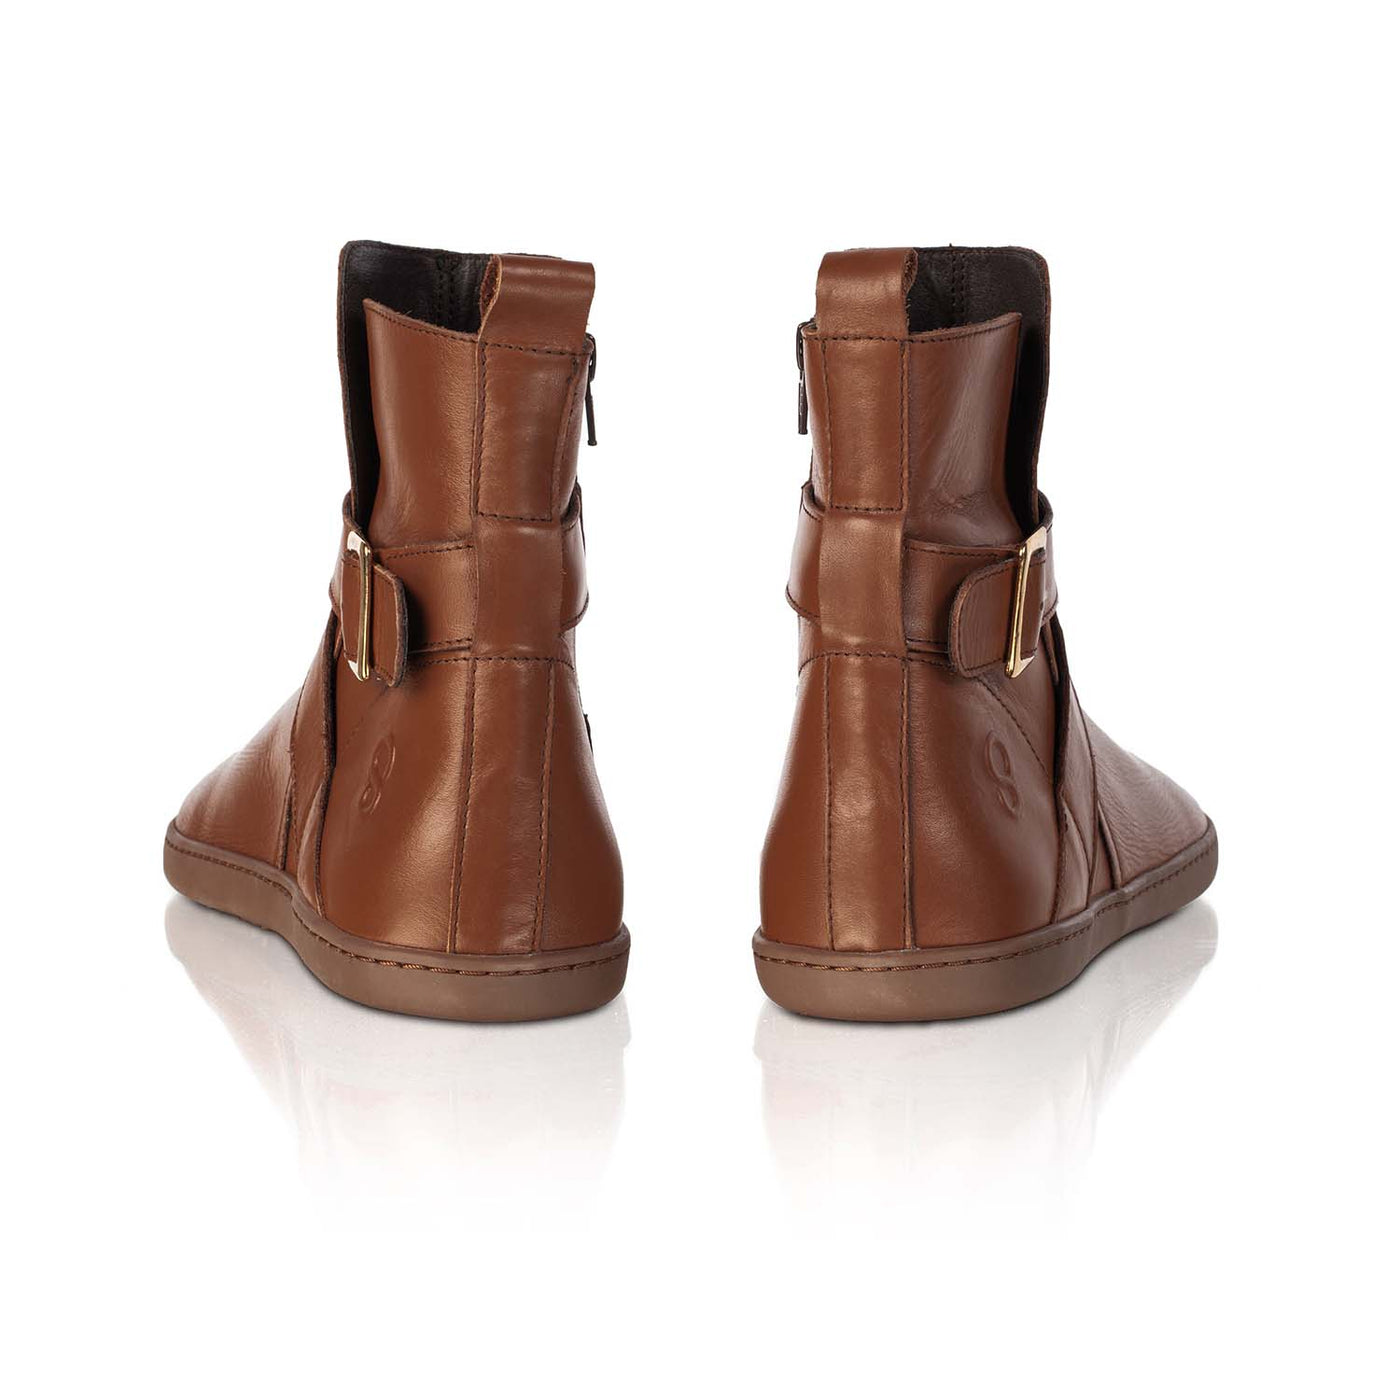 A photo of the Shapen Divine ankle boots made with a smooth leather upper, a microline lining, and rubber soles. The boots are brown in color and have an ankle strap with a gold buckle, as well as a side zipper. Both boots are shown from behind on a white background. #color_brown